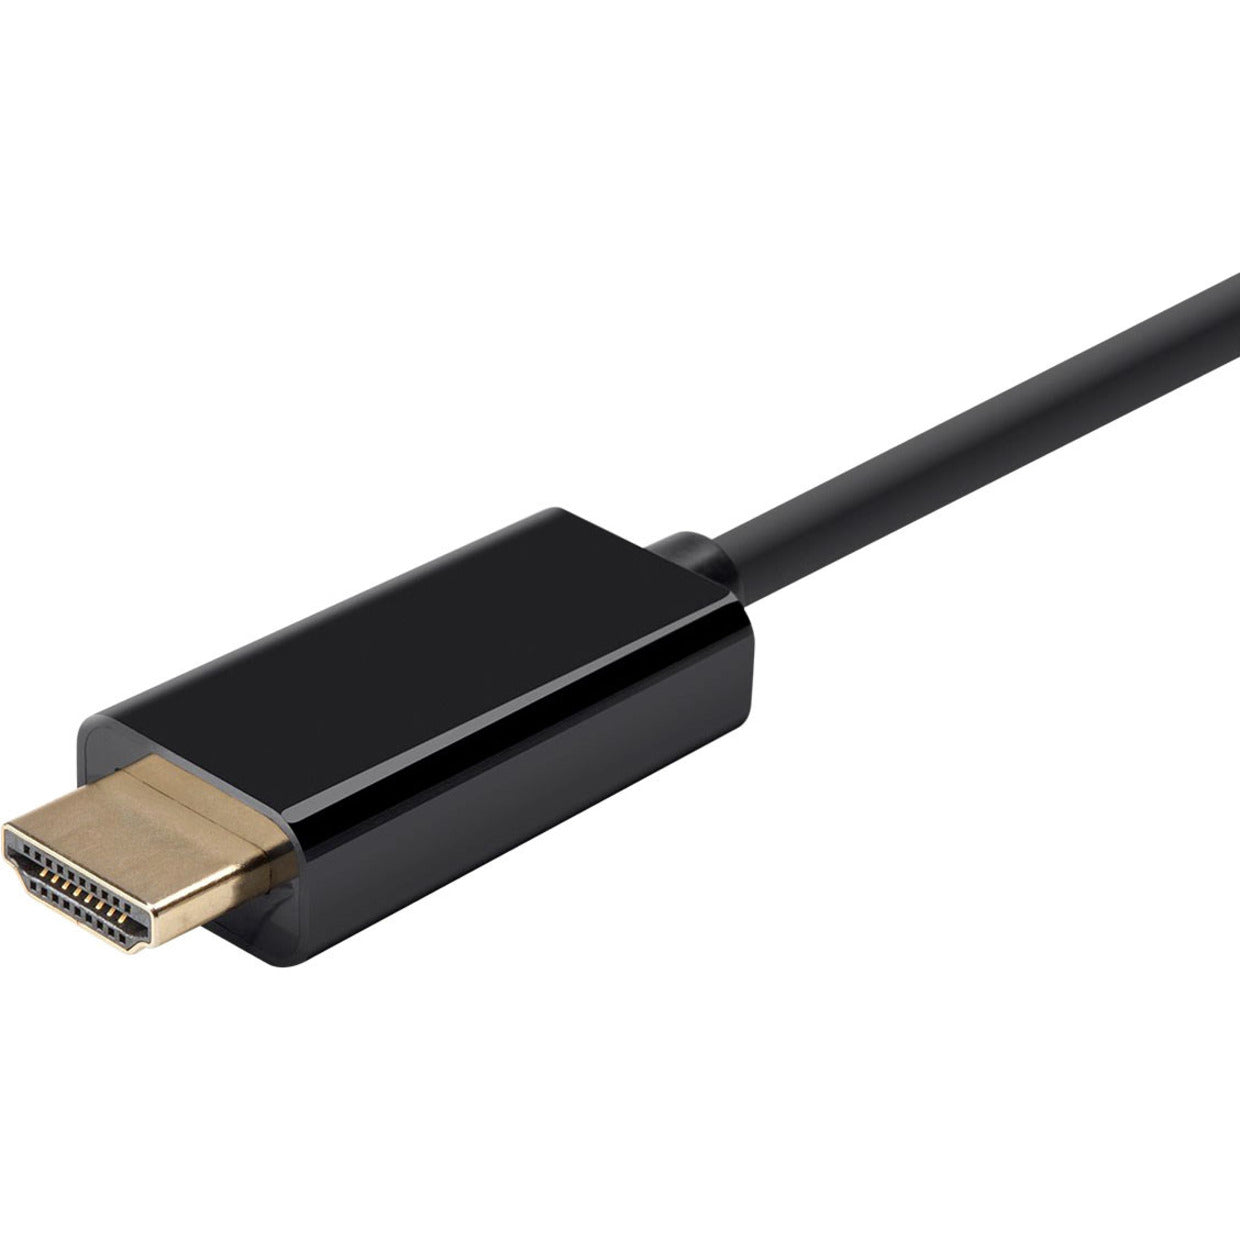 Monoprice Select Series Mini DisplayPort to HDTV Cable 10ft